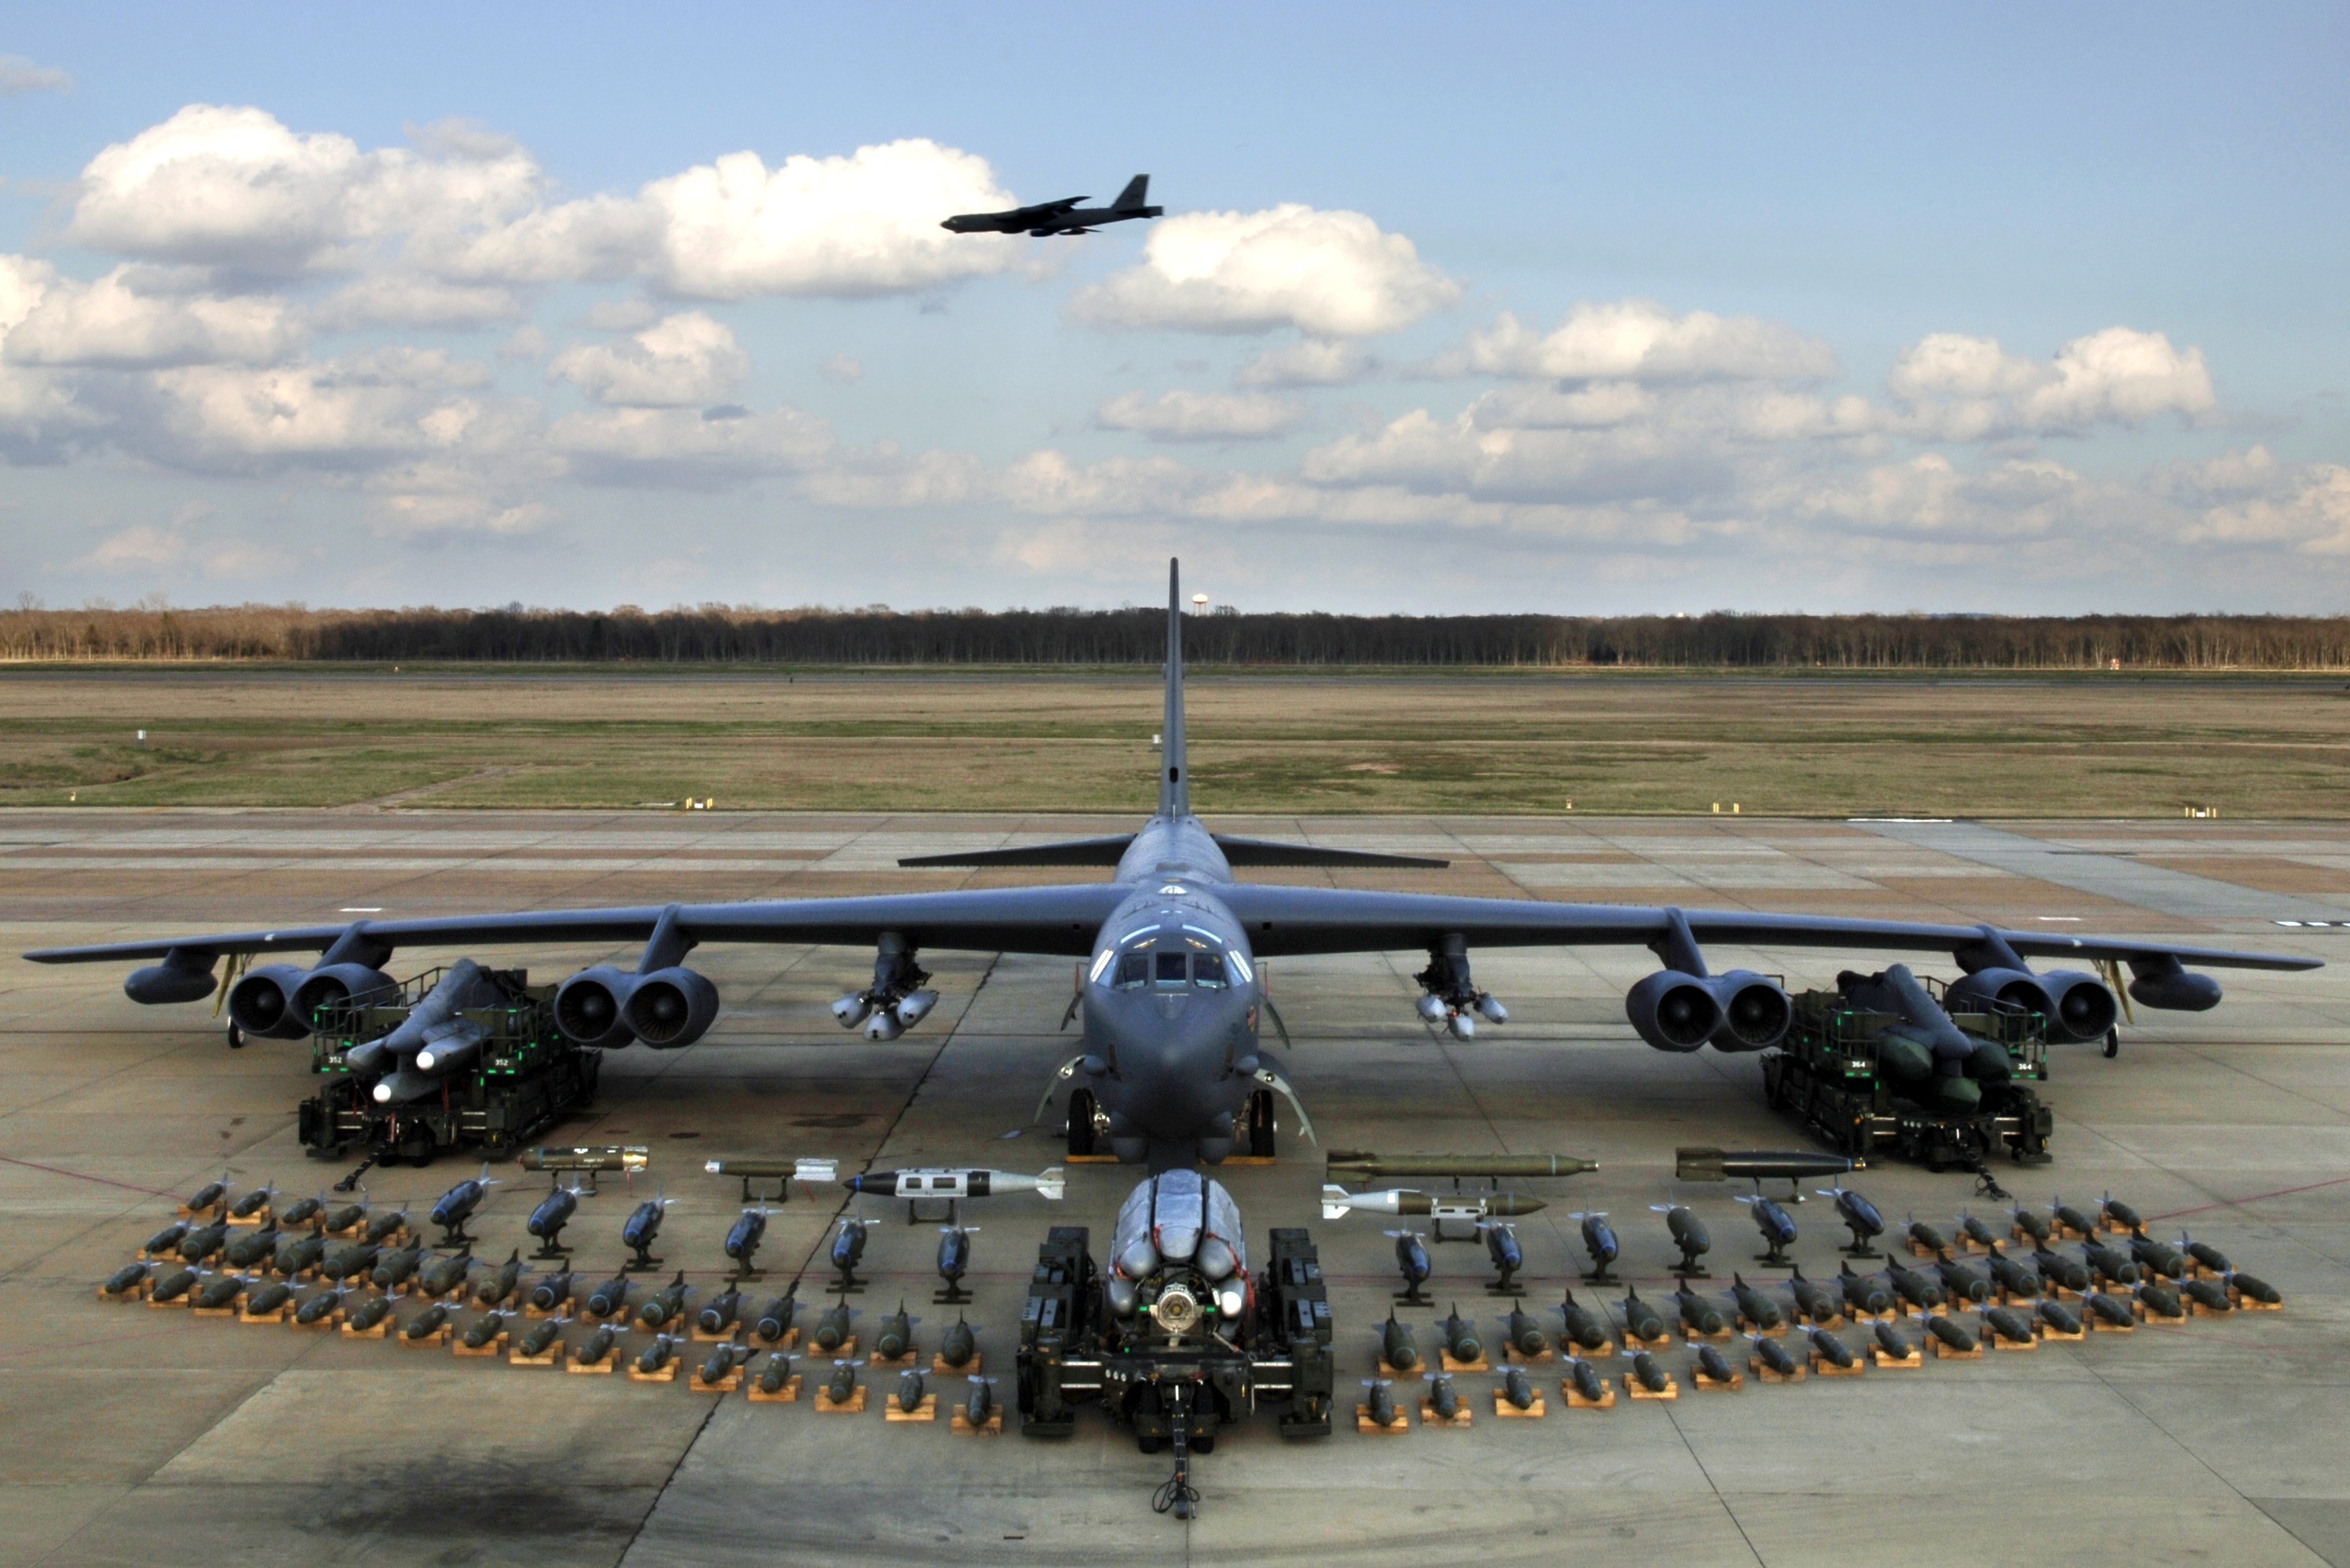 General 2994x1998 airplane Bomber Boeing B-52 Stratofortress aircraft military aircraft vehicle weapon military vehicle military American aircraft Boeing frontal view bombs